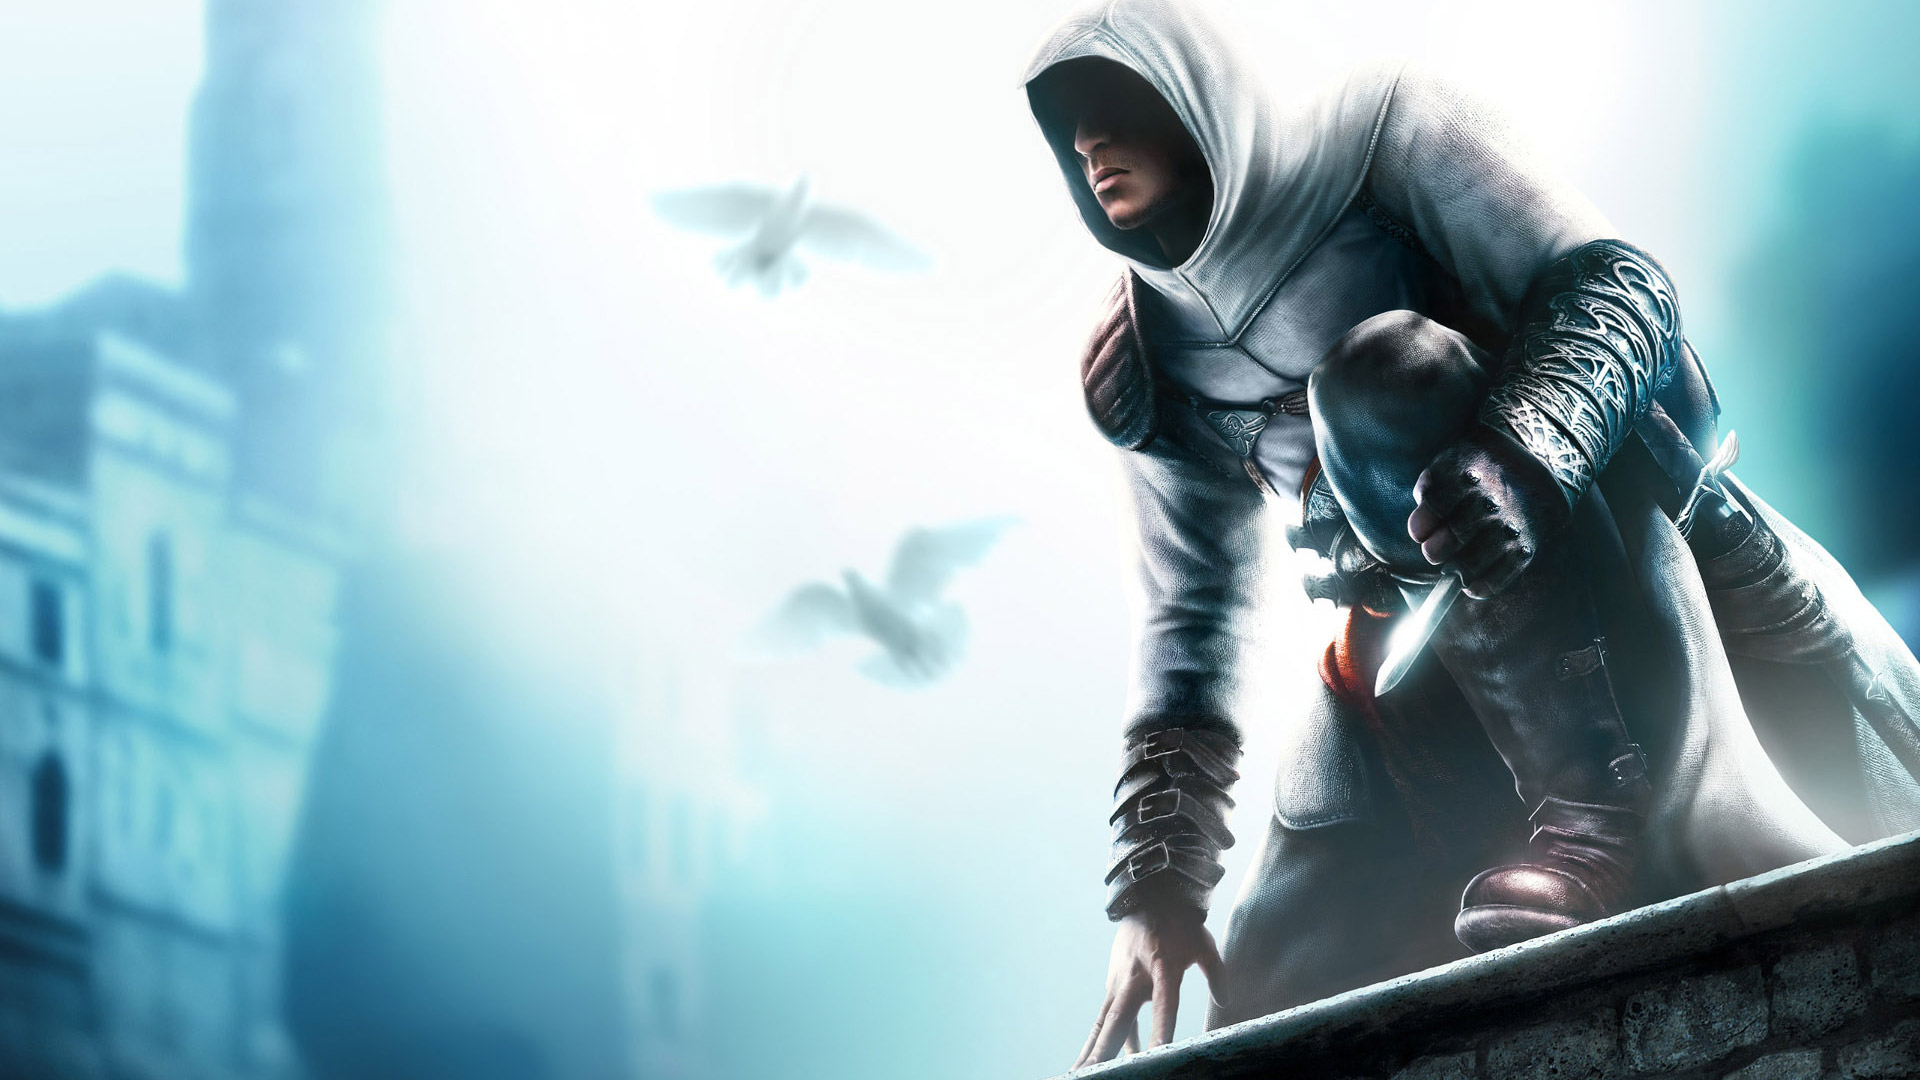 assassin's creed wallpaper,cool,fun,photography,fictional character,games